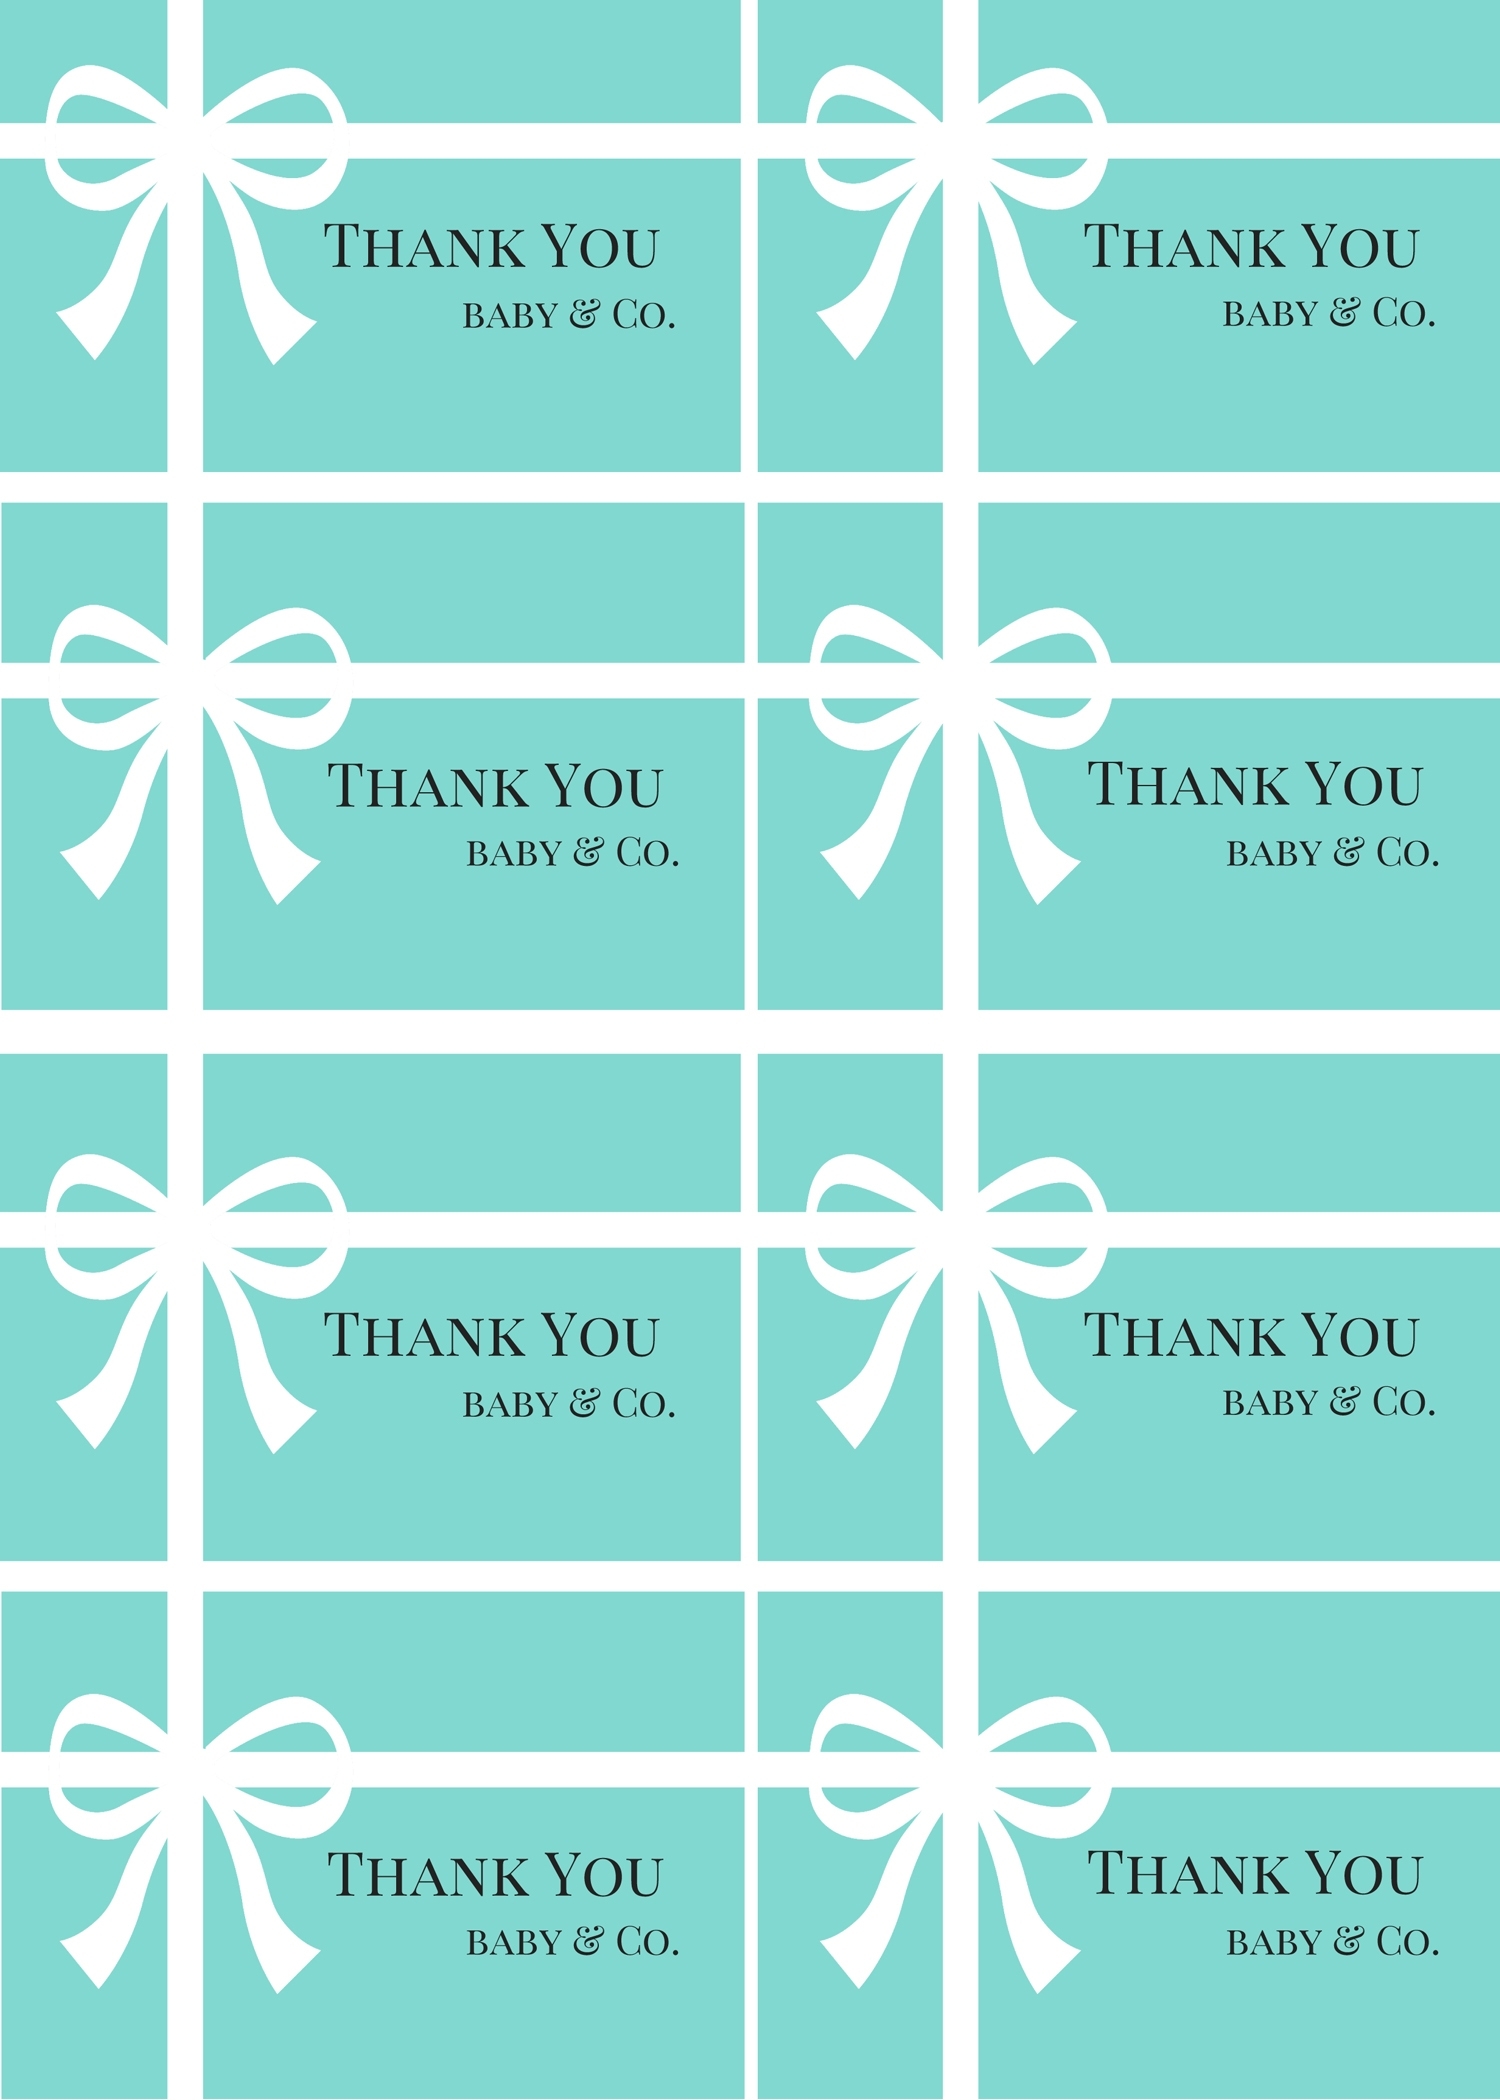 Free Printable Baby Shower Thank You Card Templates : Free Printable With Thank You Card Template For Baby Shower